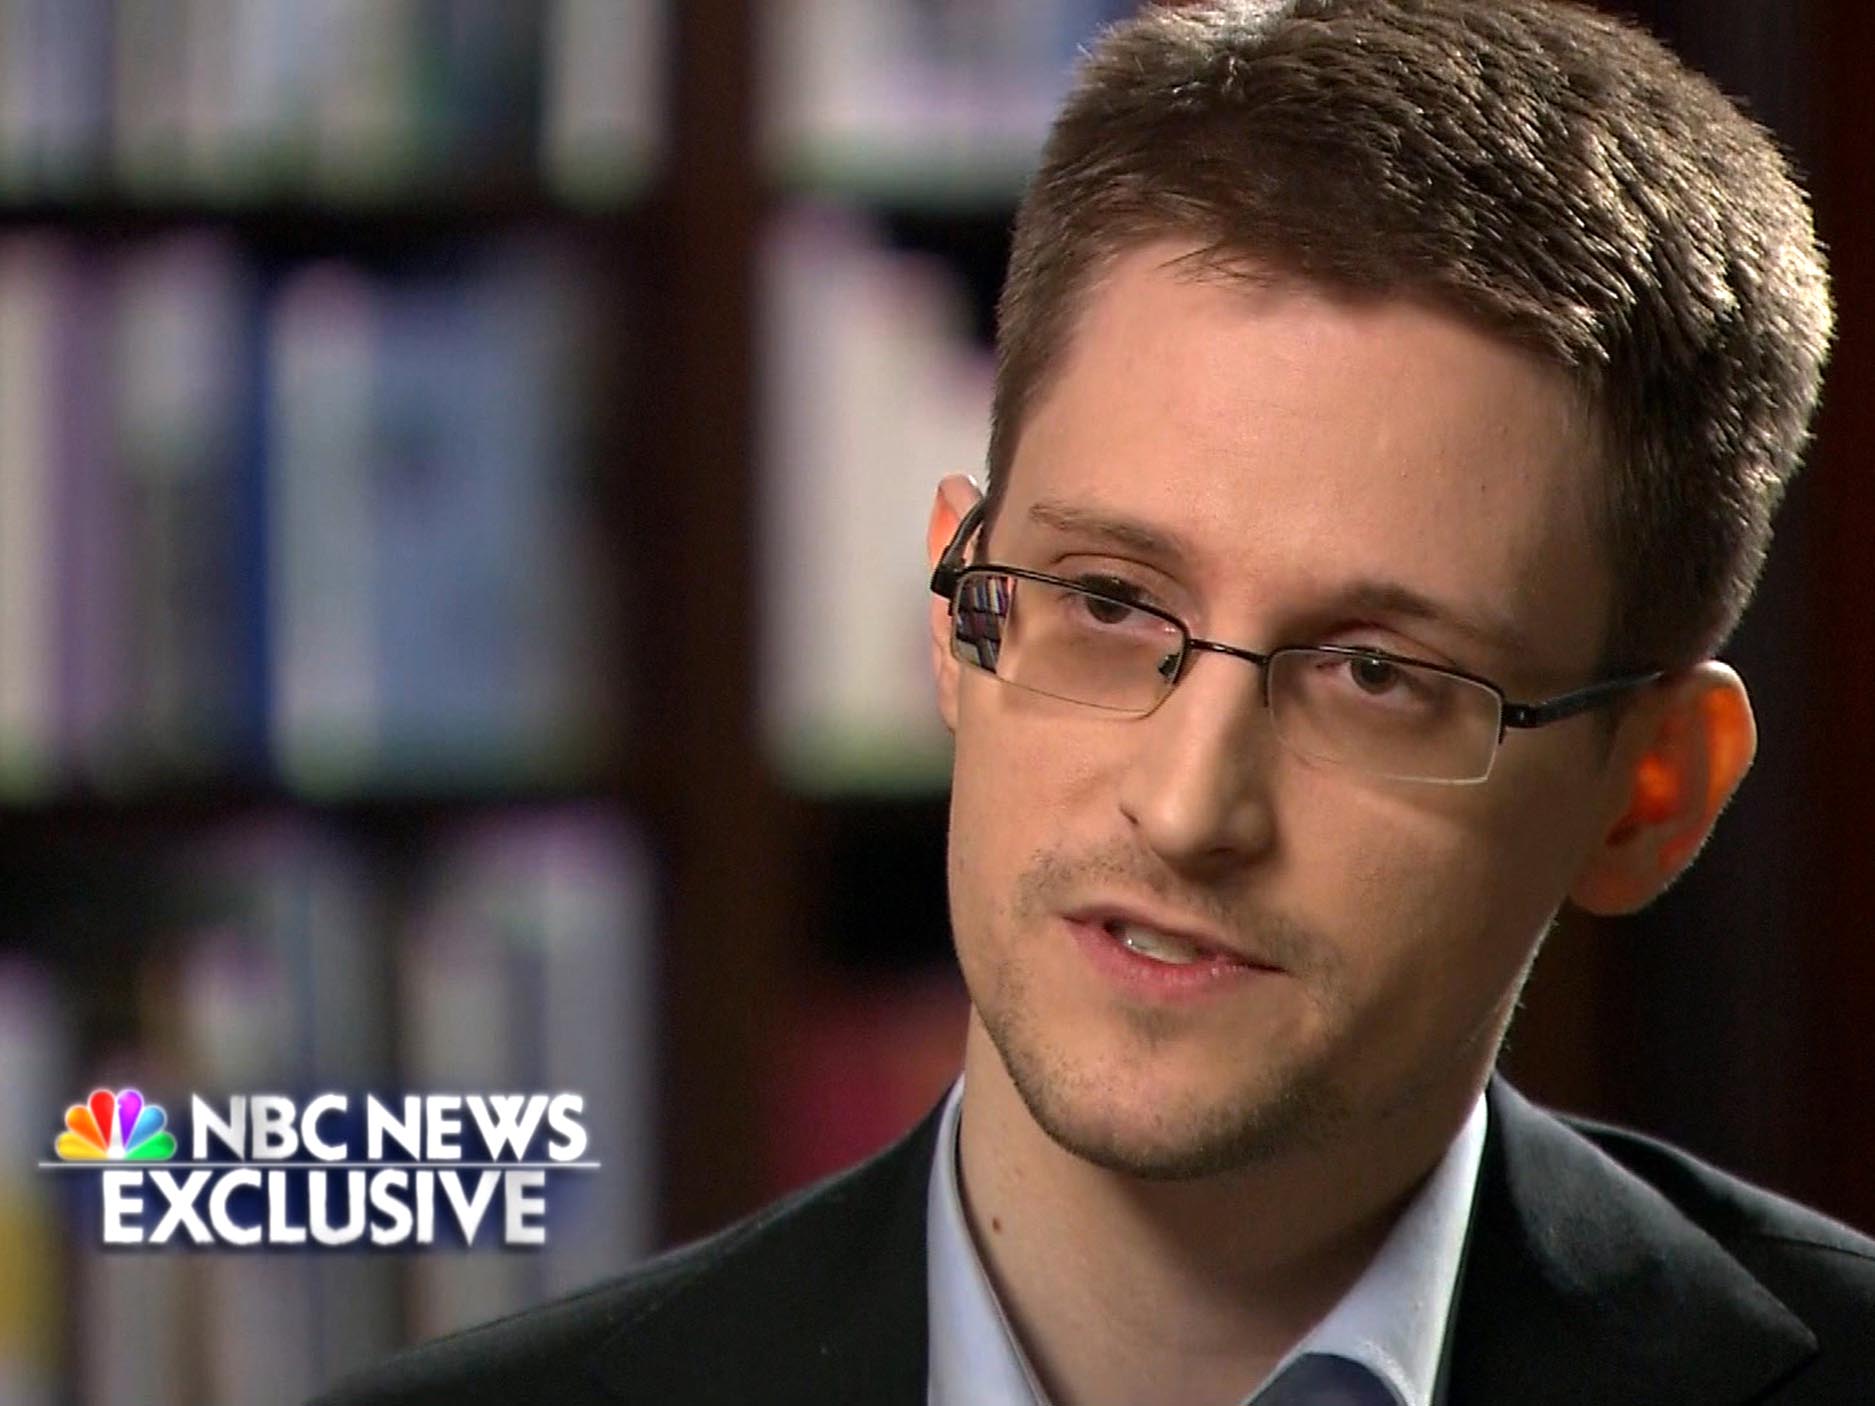 Edward Snowden speaks with Brian Williams in an NBC News exclusive interview.